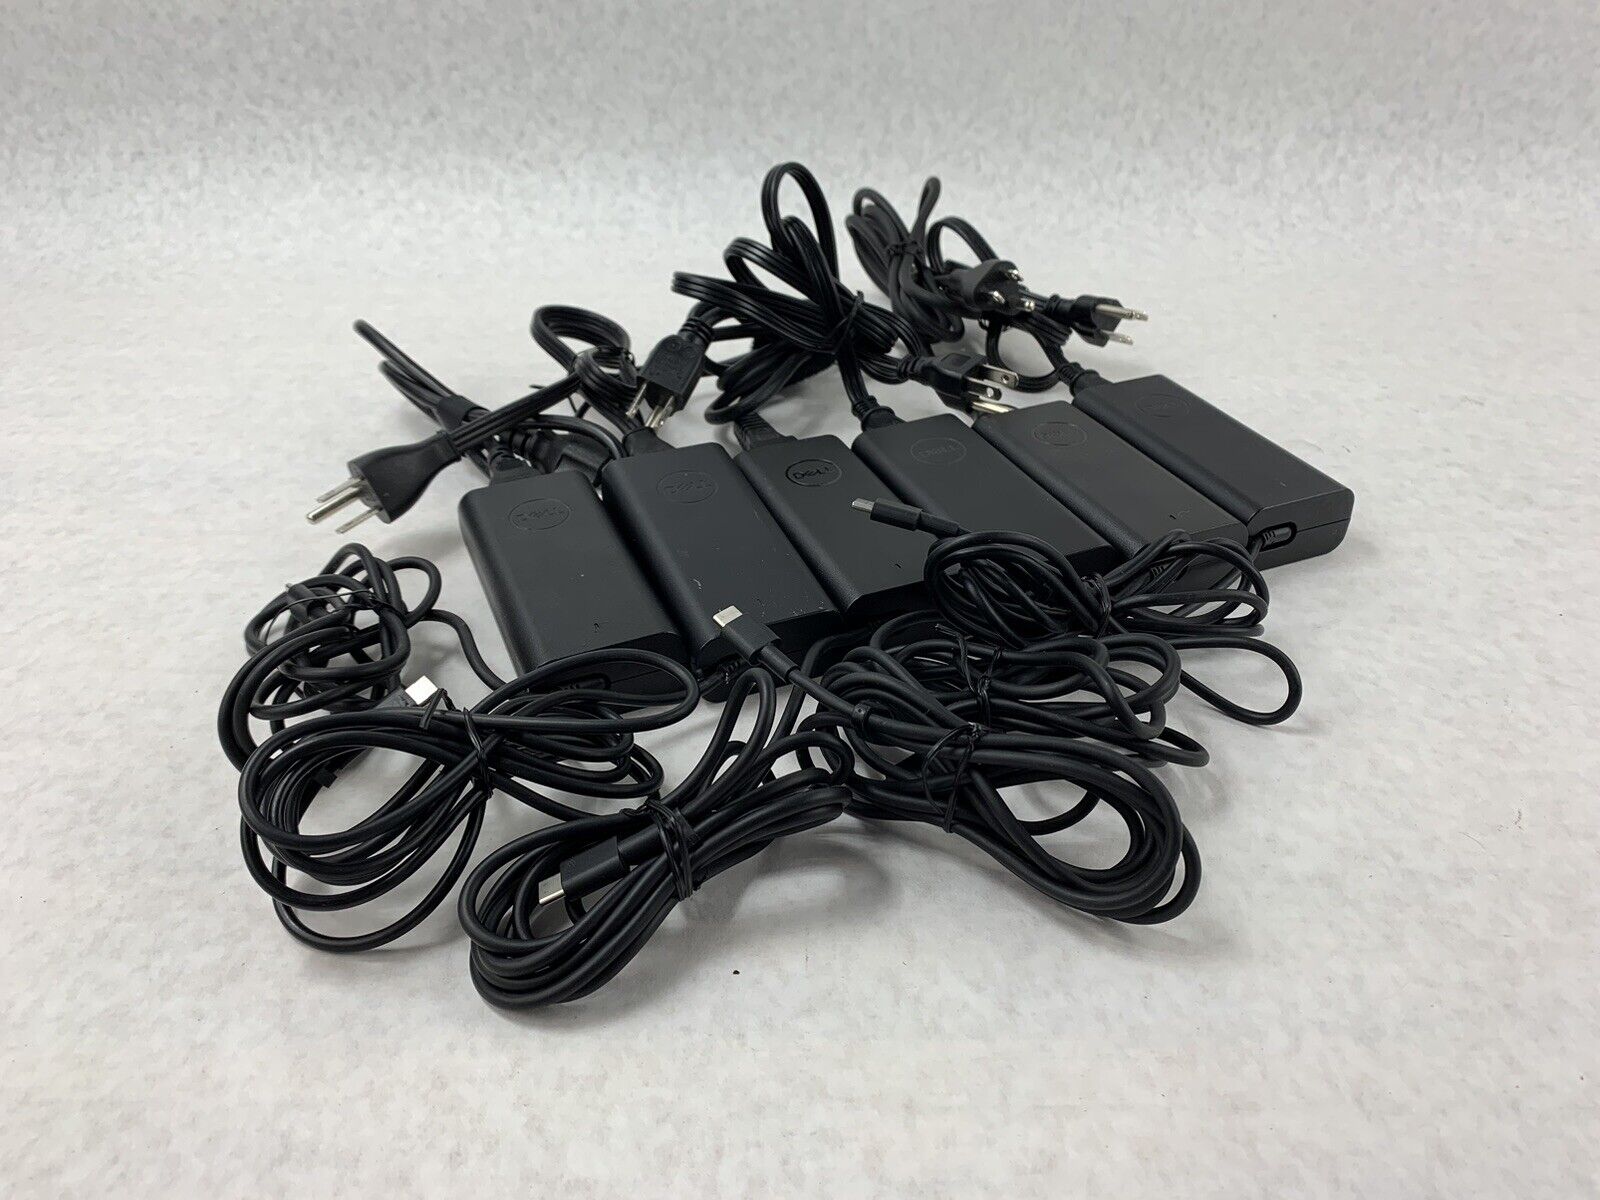 Lot of 6 Dell USB Type-C 65W 20V AC Power Adapter HA65NM190